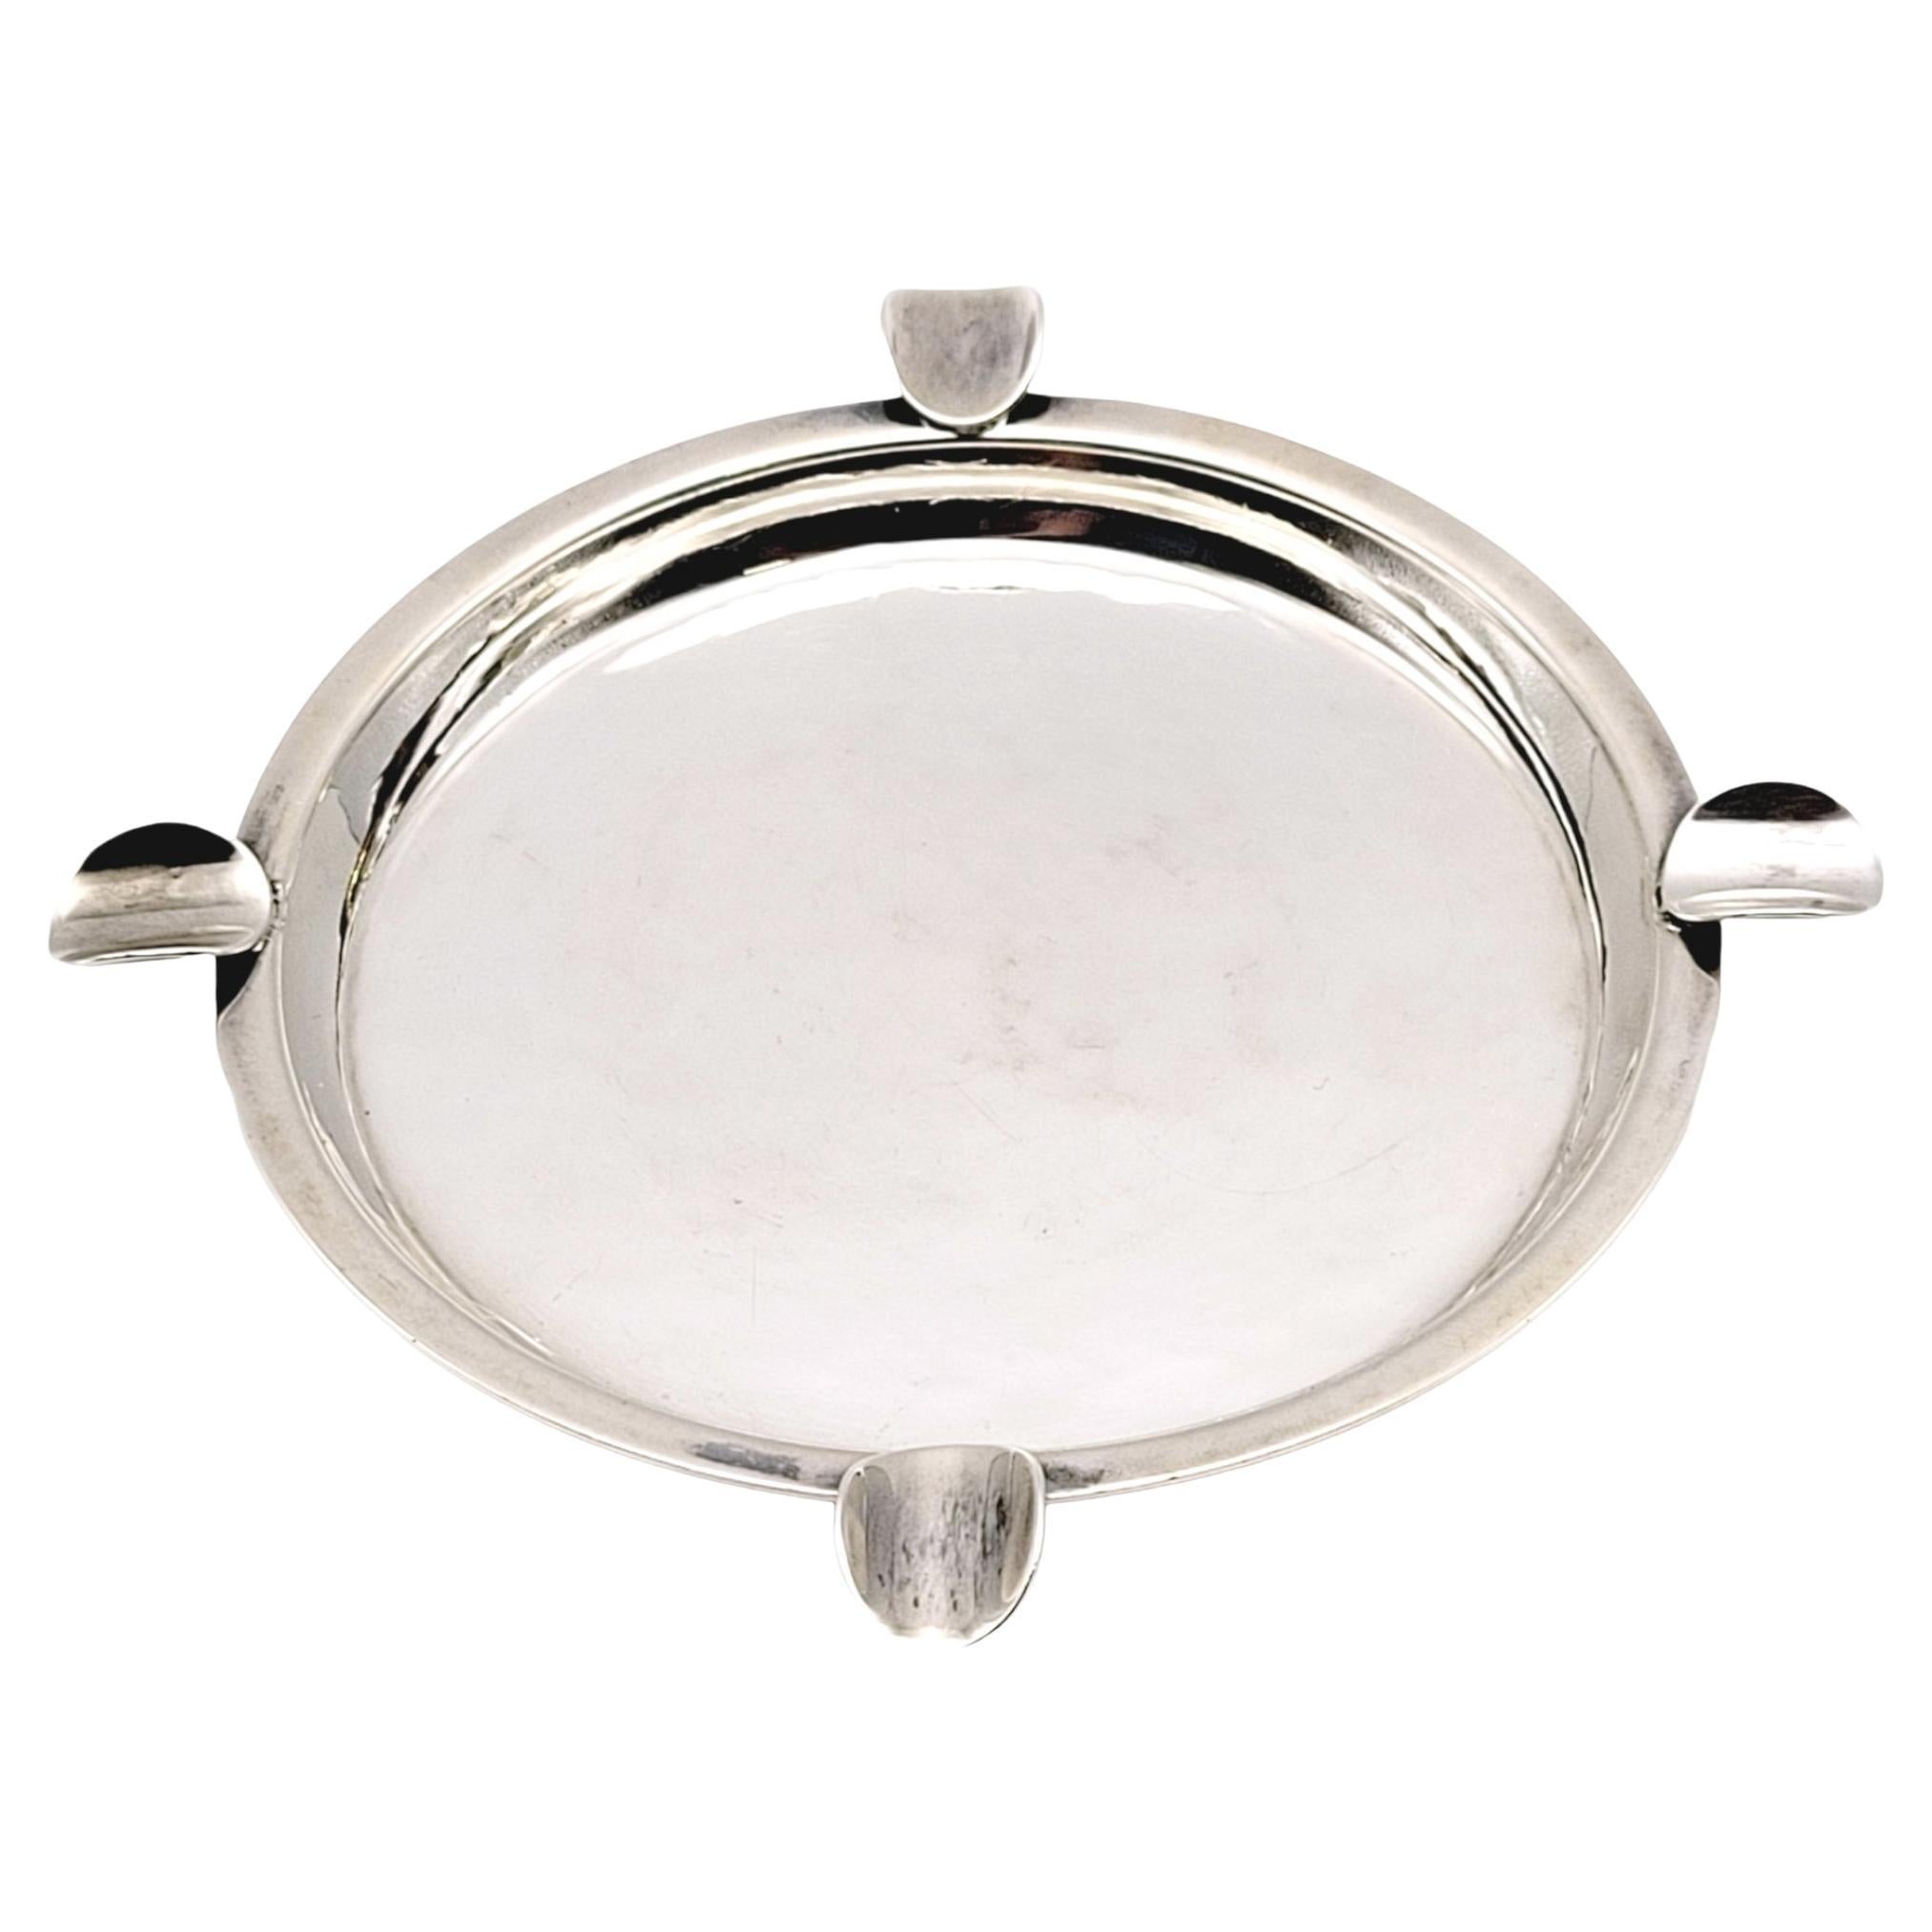 Carl Poul Petersen Polished Modern Ashtray in Sterling Silver, circa 1940-1970 For Sale